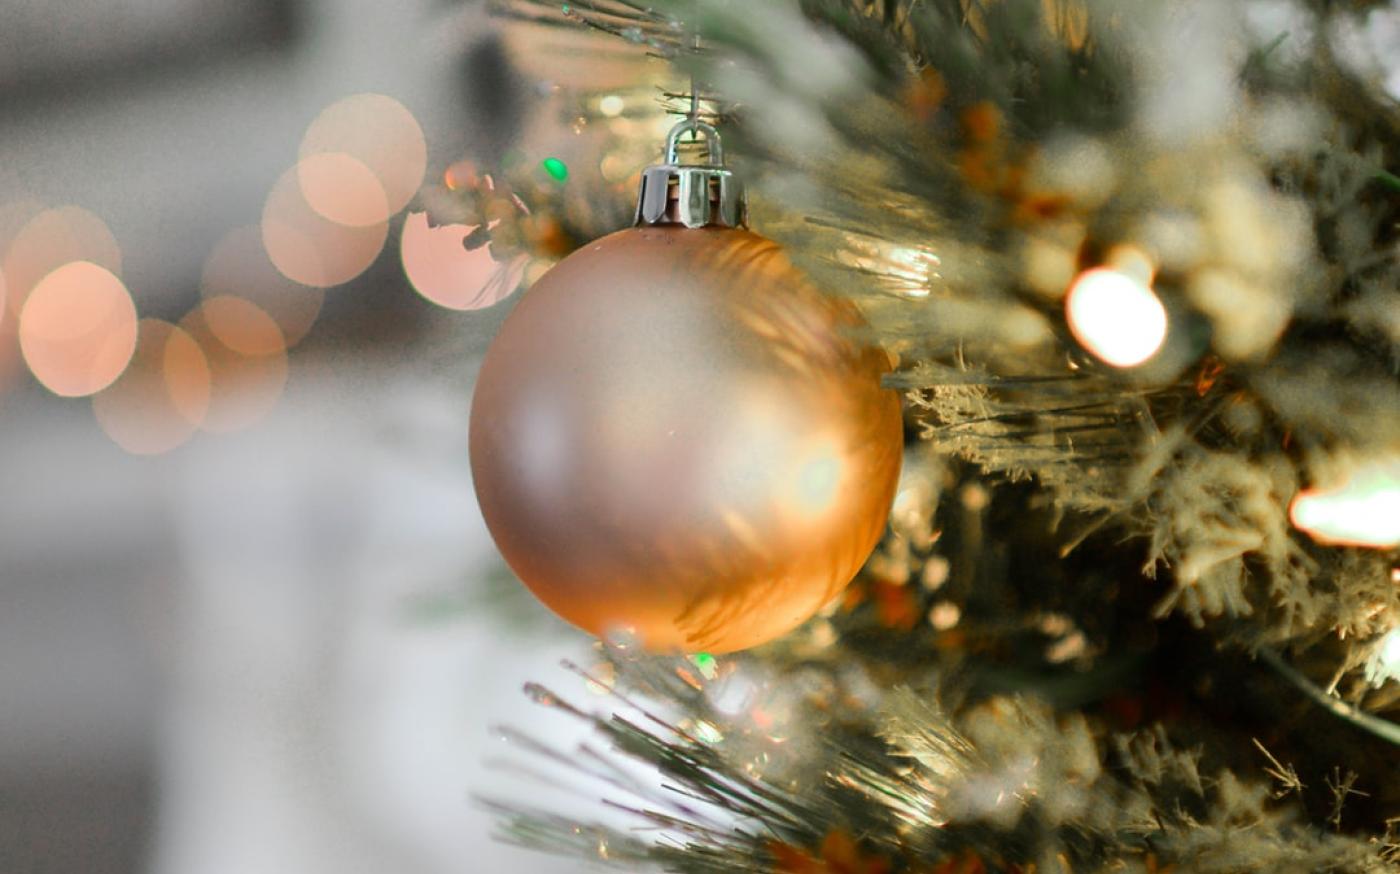 Image of a golden Christmas Tree ornament